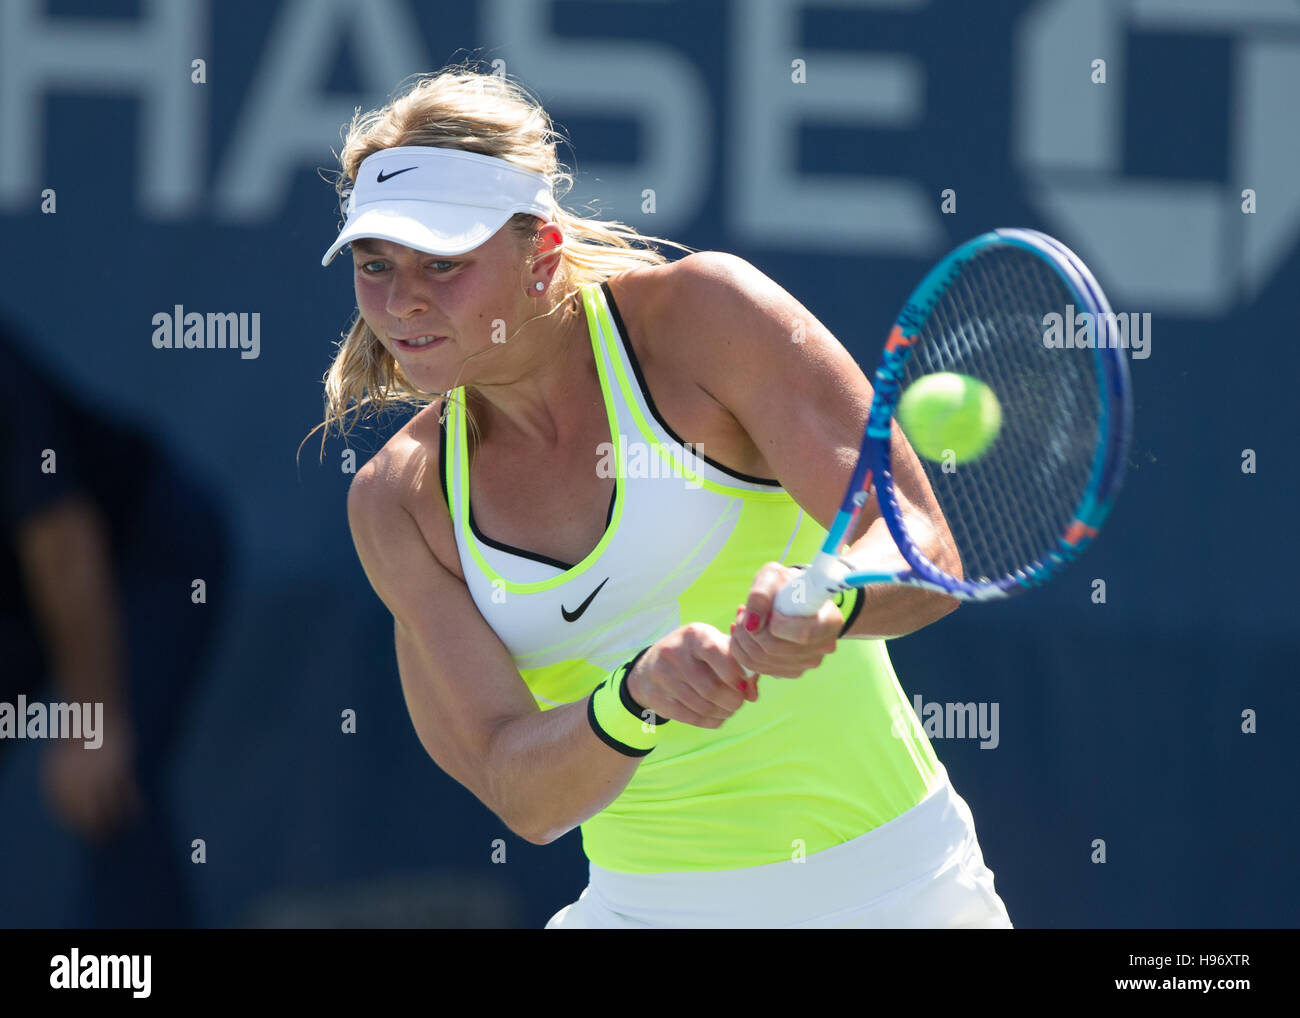 CARINA WITTHOEFT (GER) at the US Open 2016 Championships in Flushing Meadows,New York,USA Stock Photo